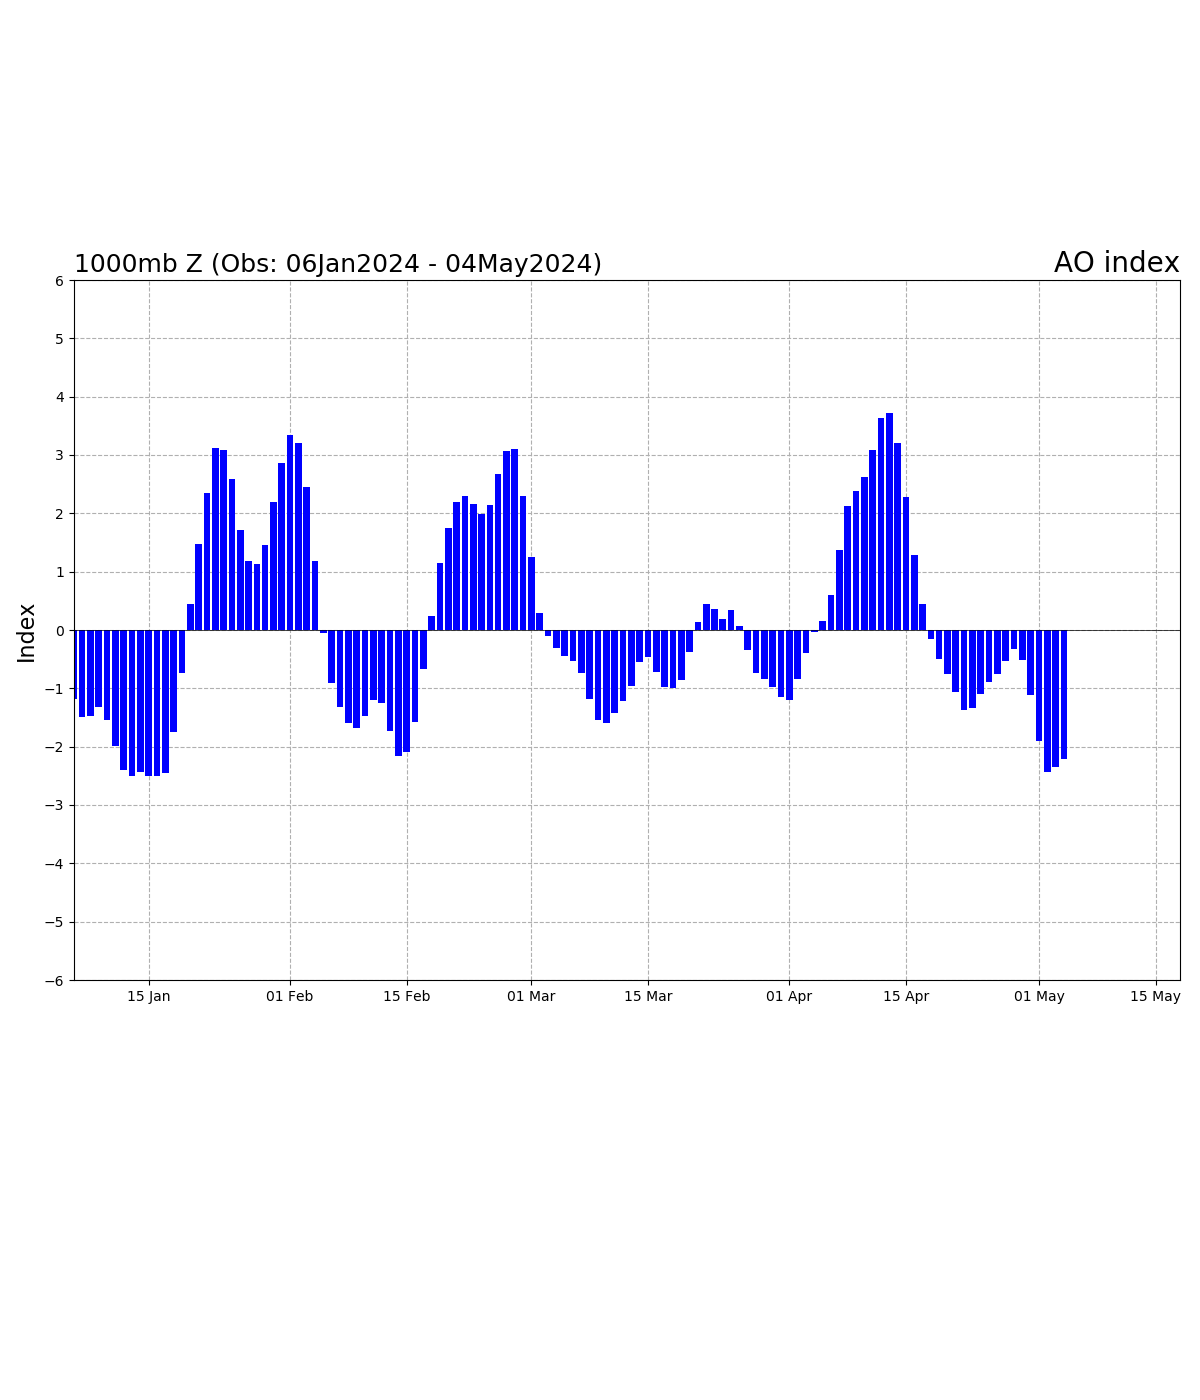 Graph of observed daily Arctic Oscillation index